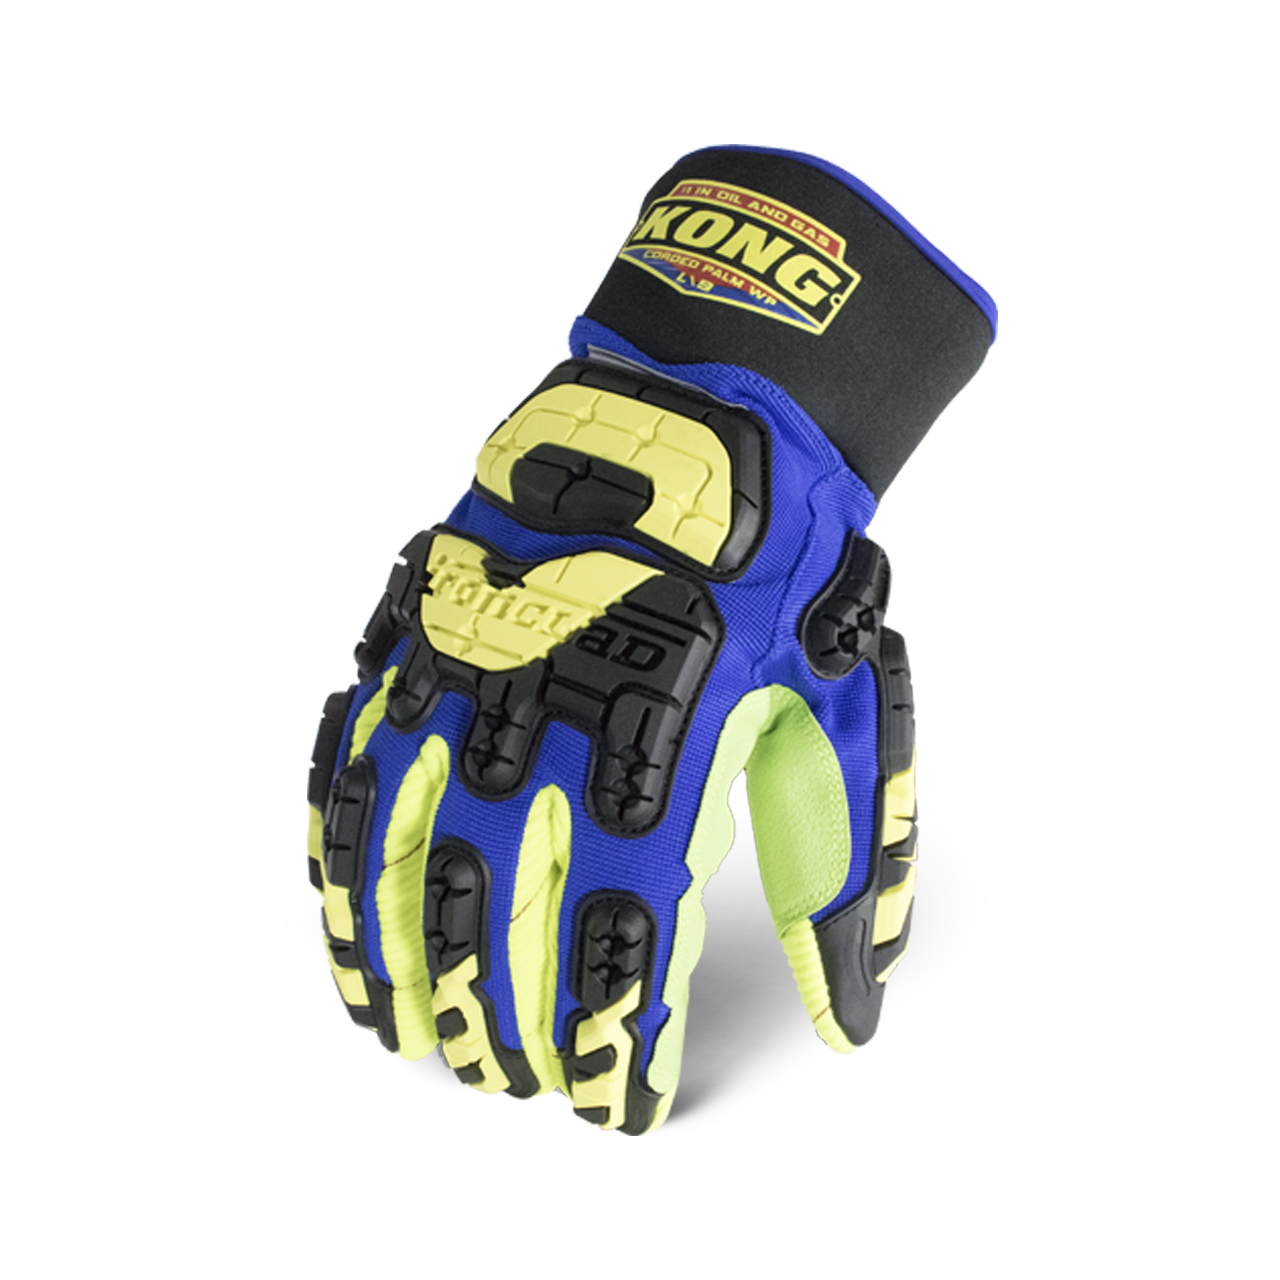 KONG® COTTON CORDED WATERPROOF IVE™ Impact Gloves - Gloves